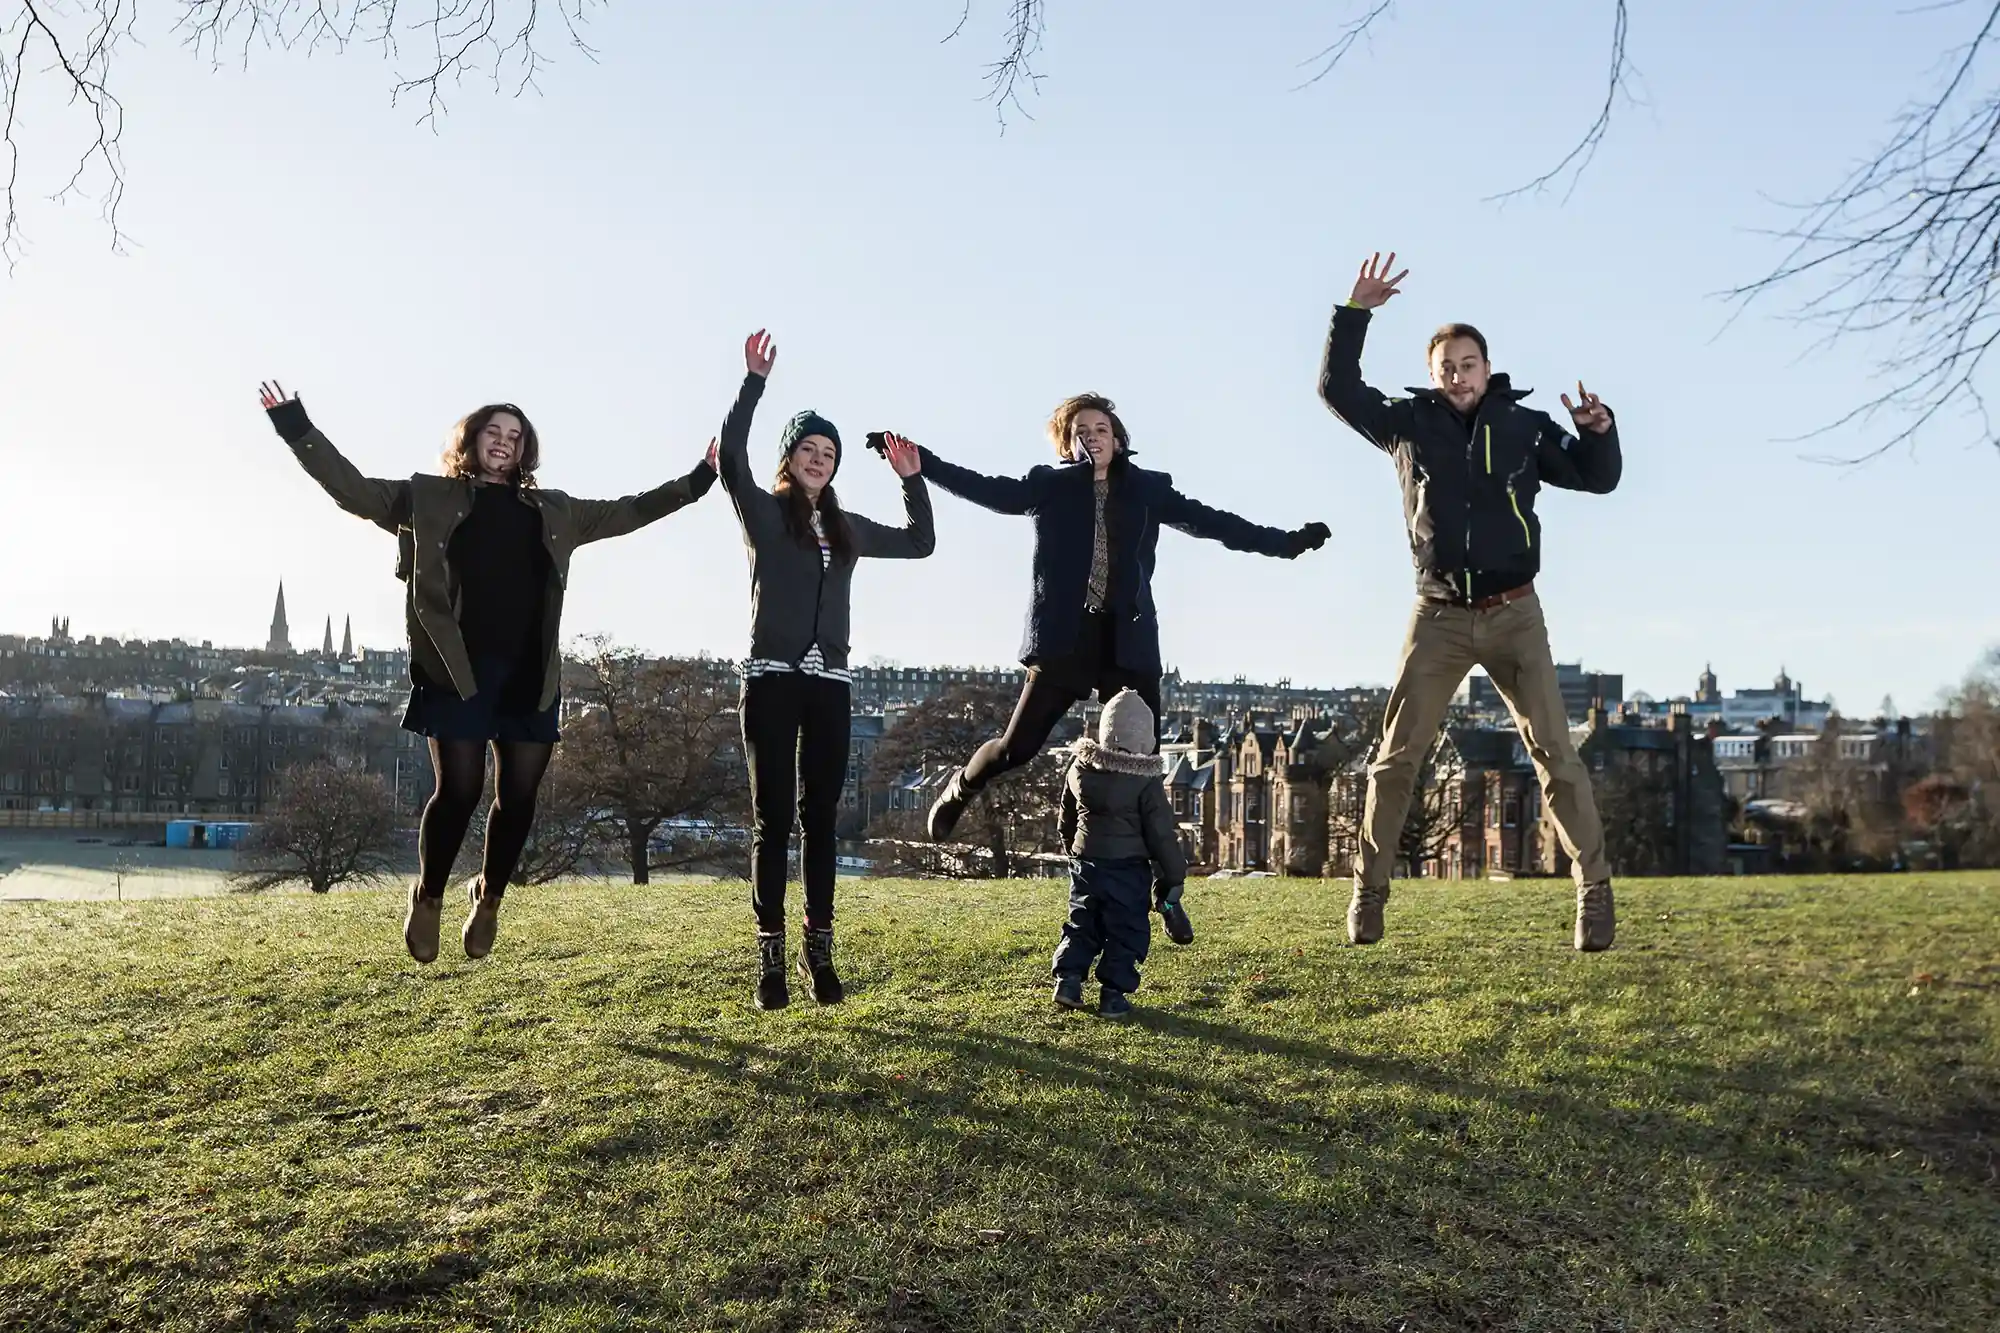 Four adults and one child are mid-jump in a park on a clear day, with a cityscape in the background.